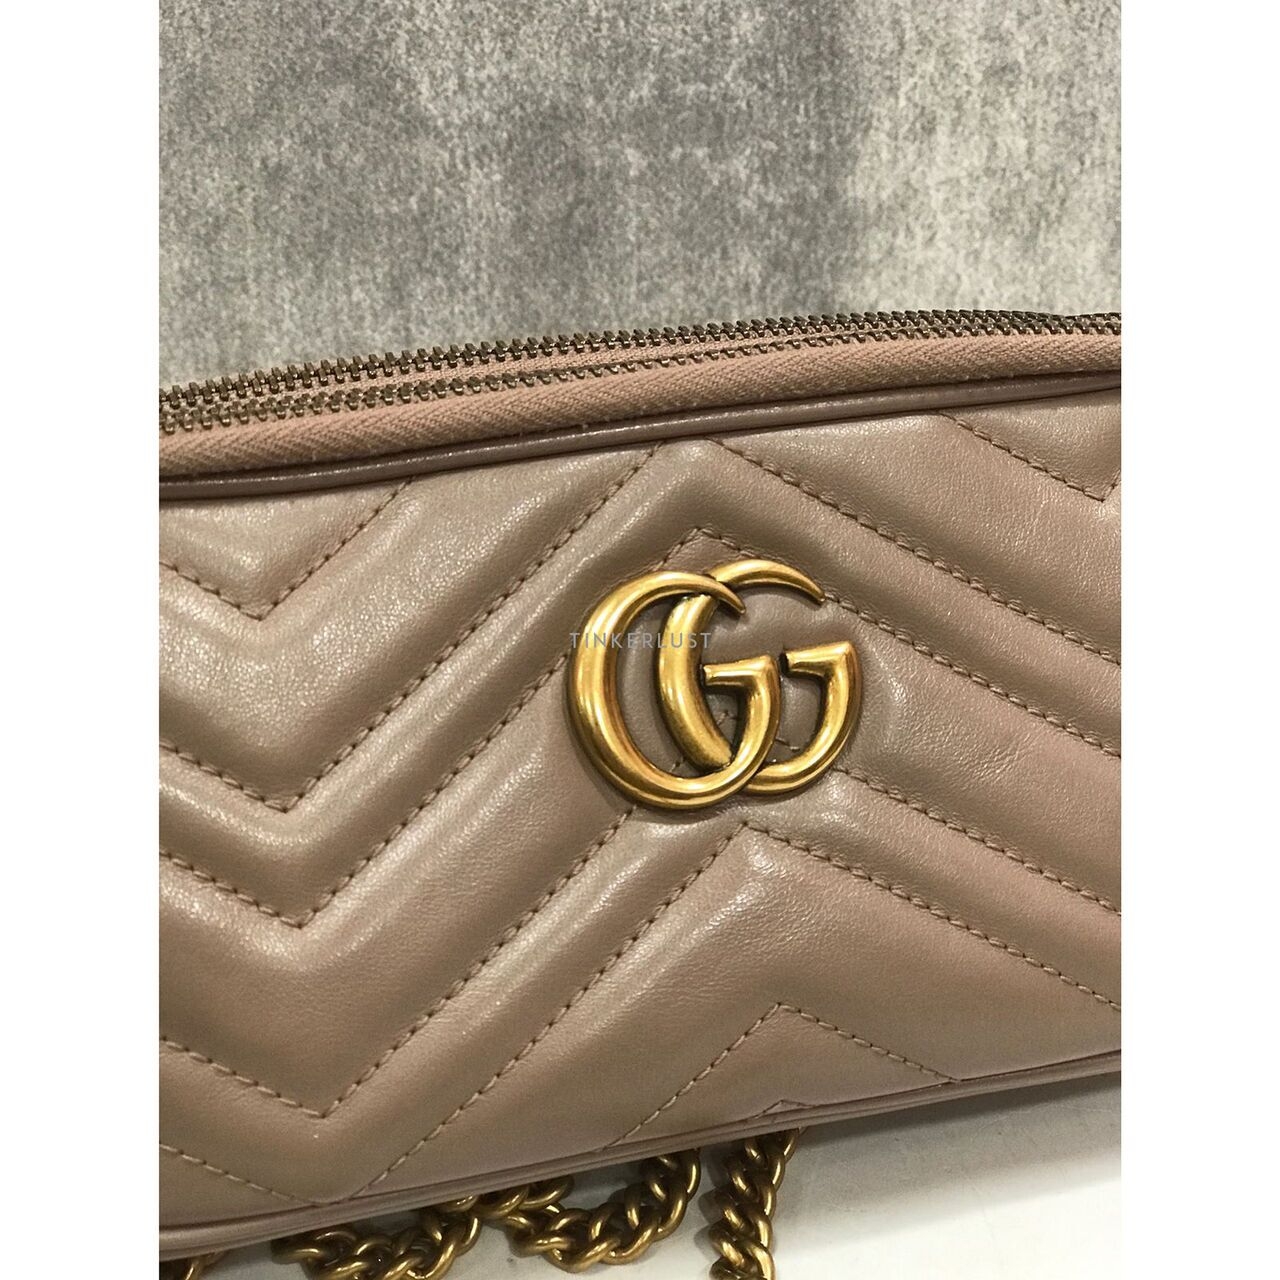 Gucci GG Marmont Nude Leather Sling Bag